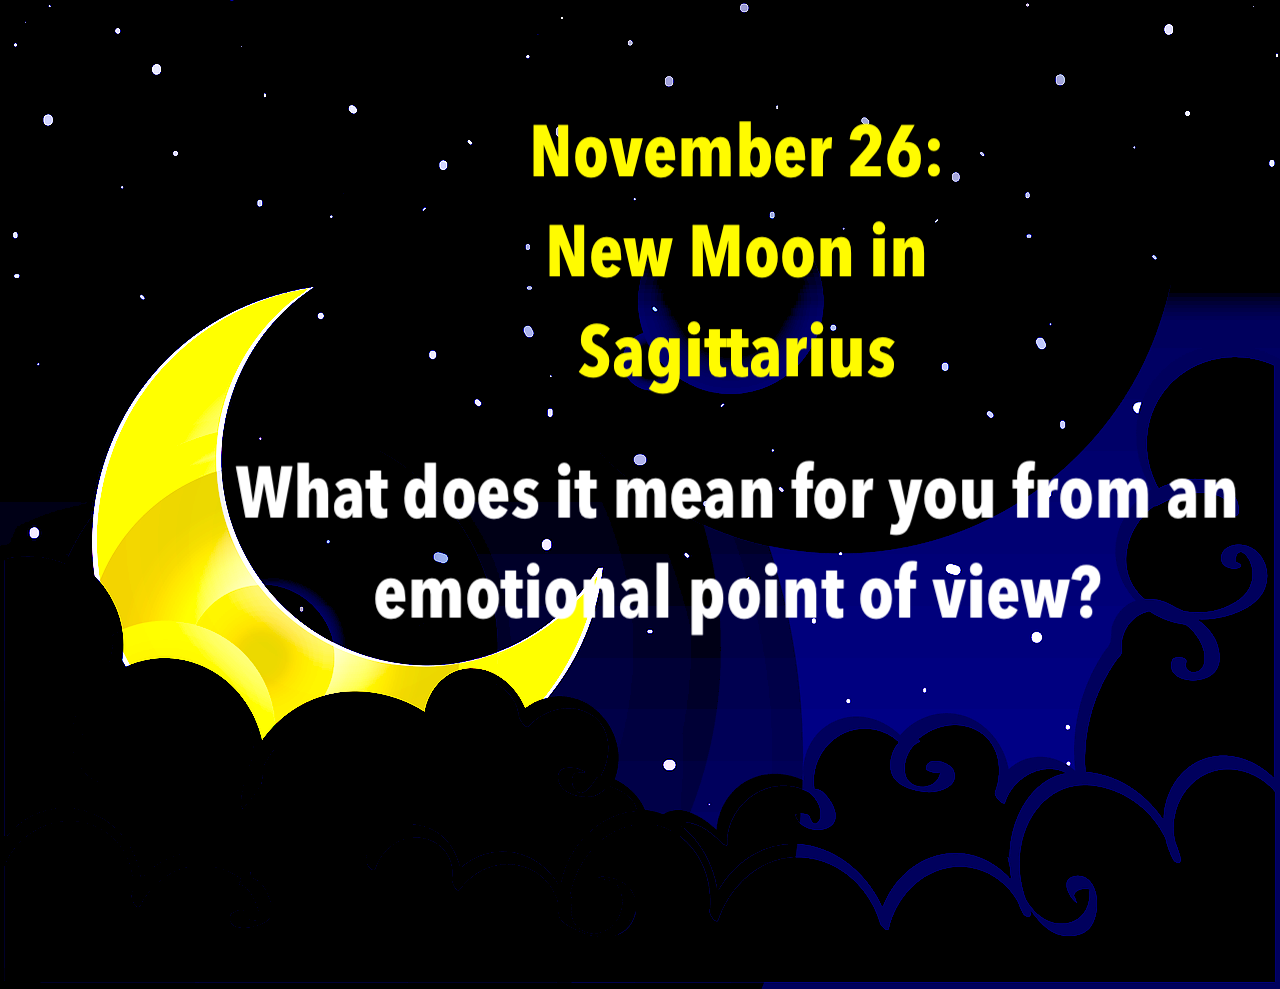 New Moon in Sagittarius on November 26: What does it mean for you?